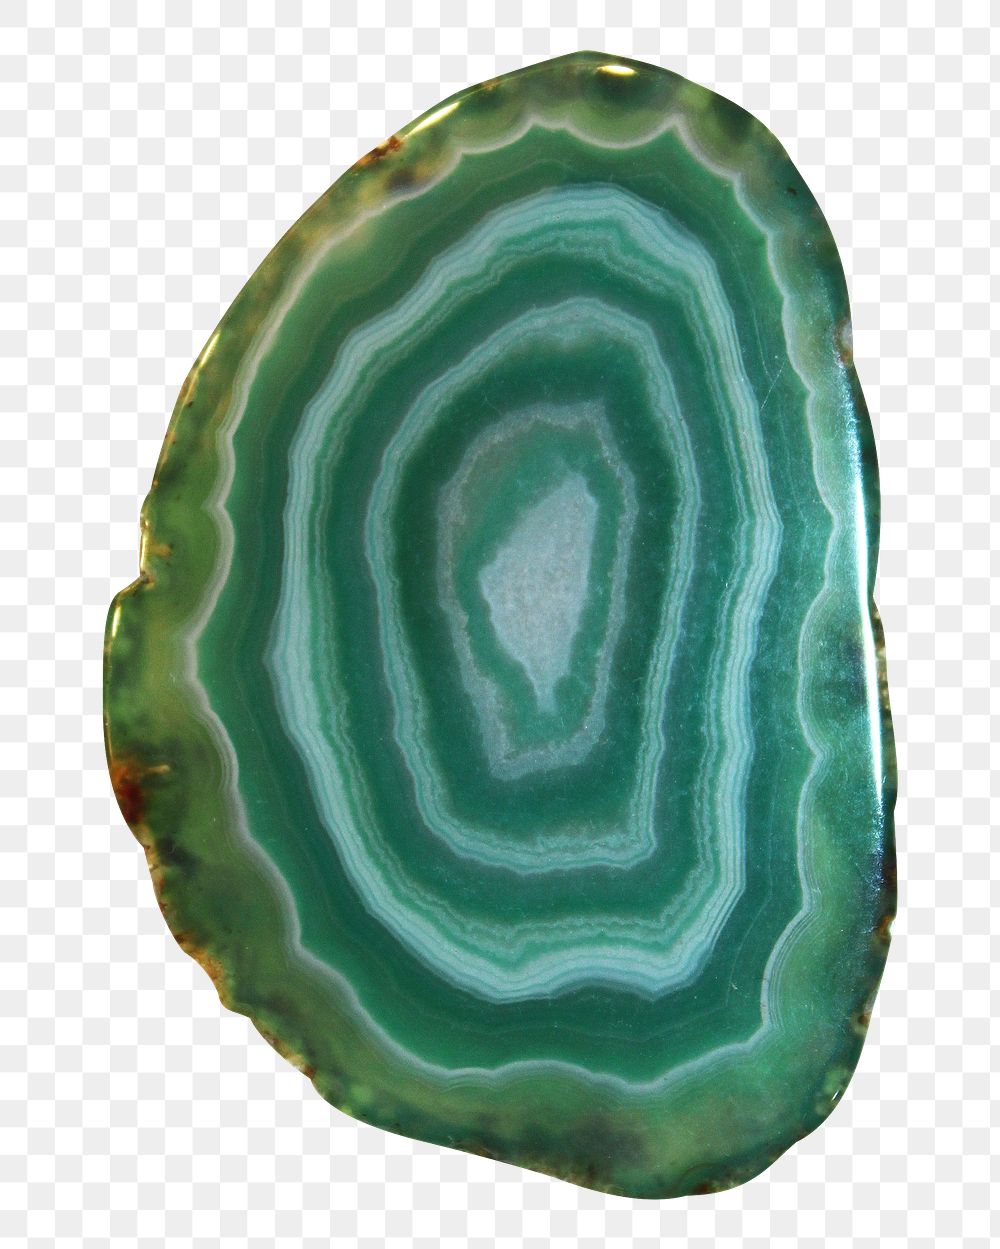 Green Agate crystal png sticker, transparent background